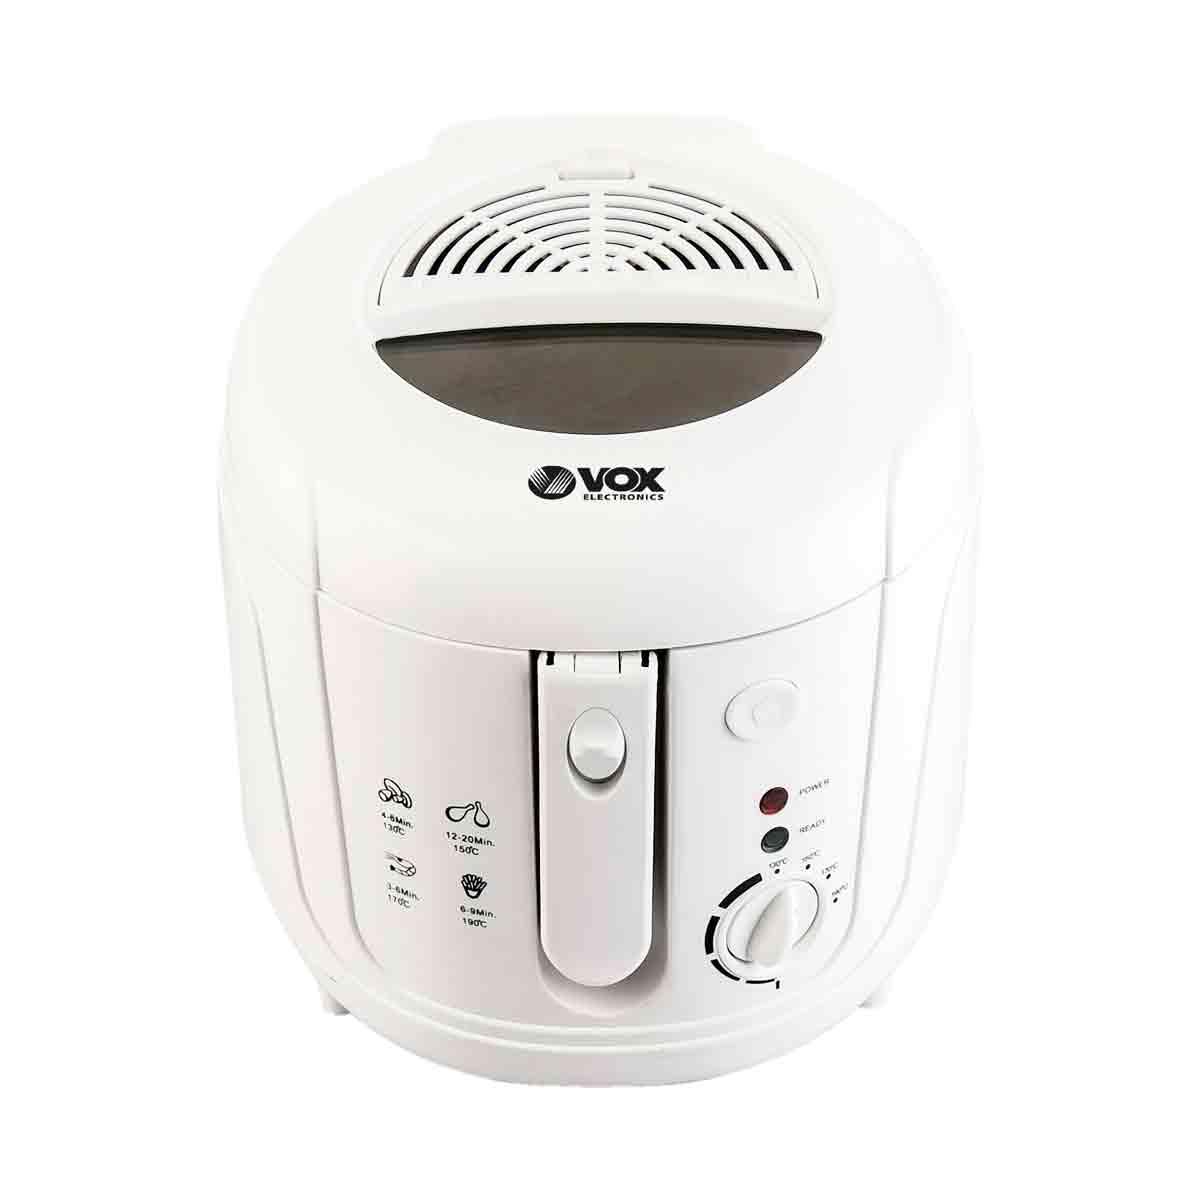 Selected image for VOX FT 5318 Friteza, 1800 W, 2,5 l